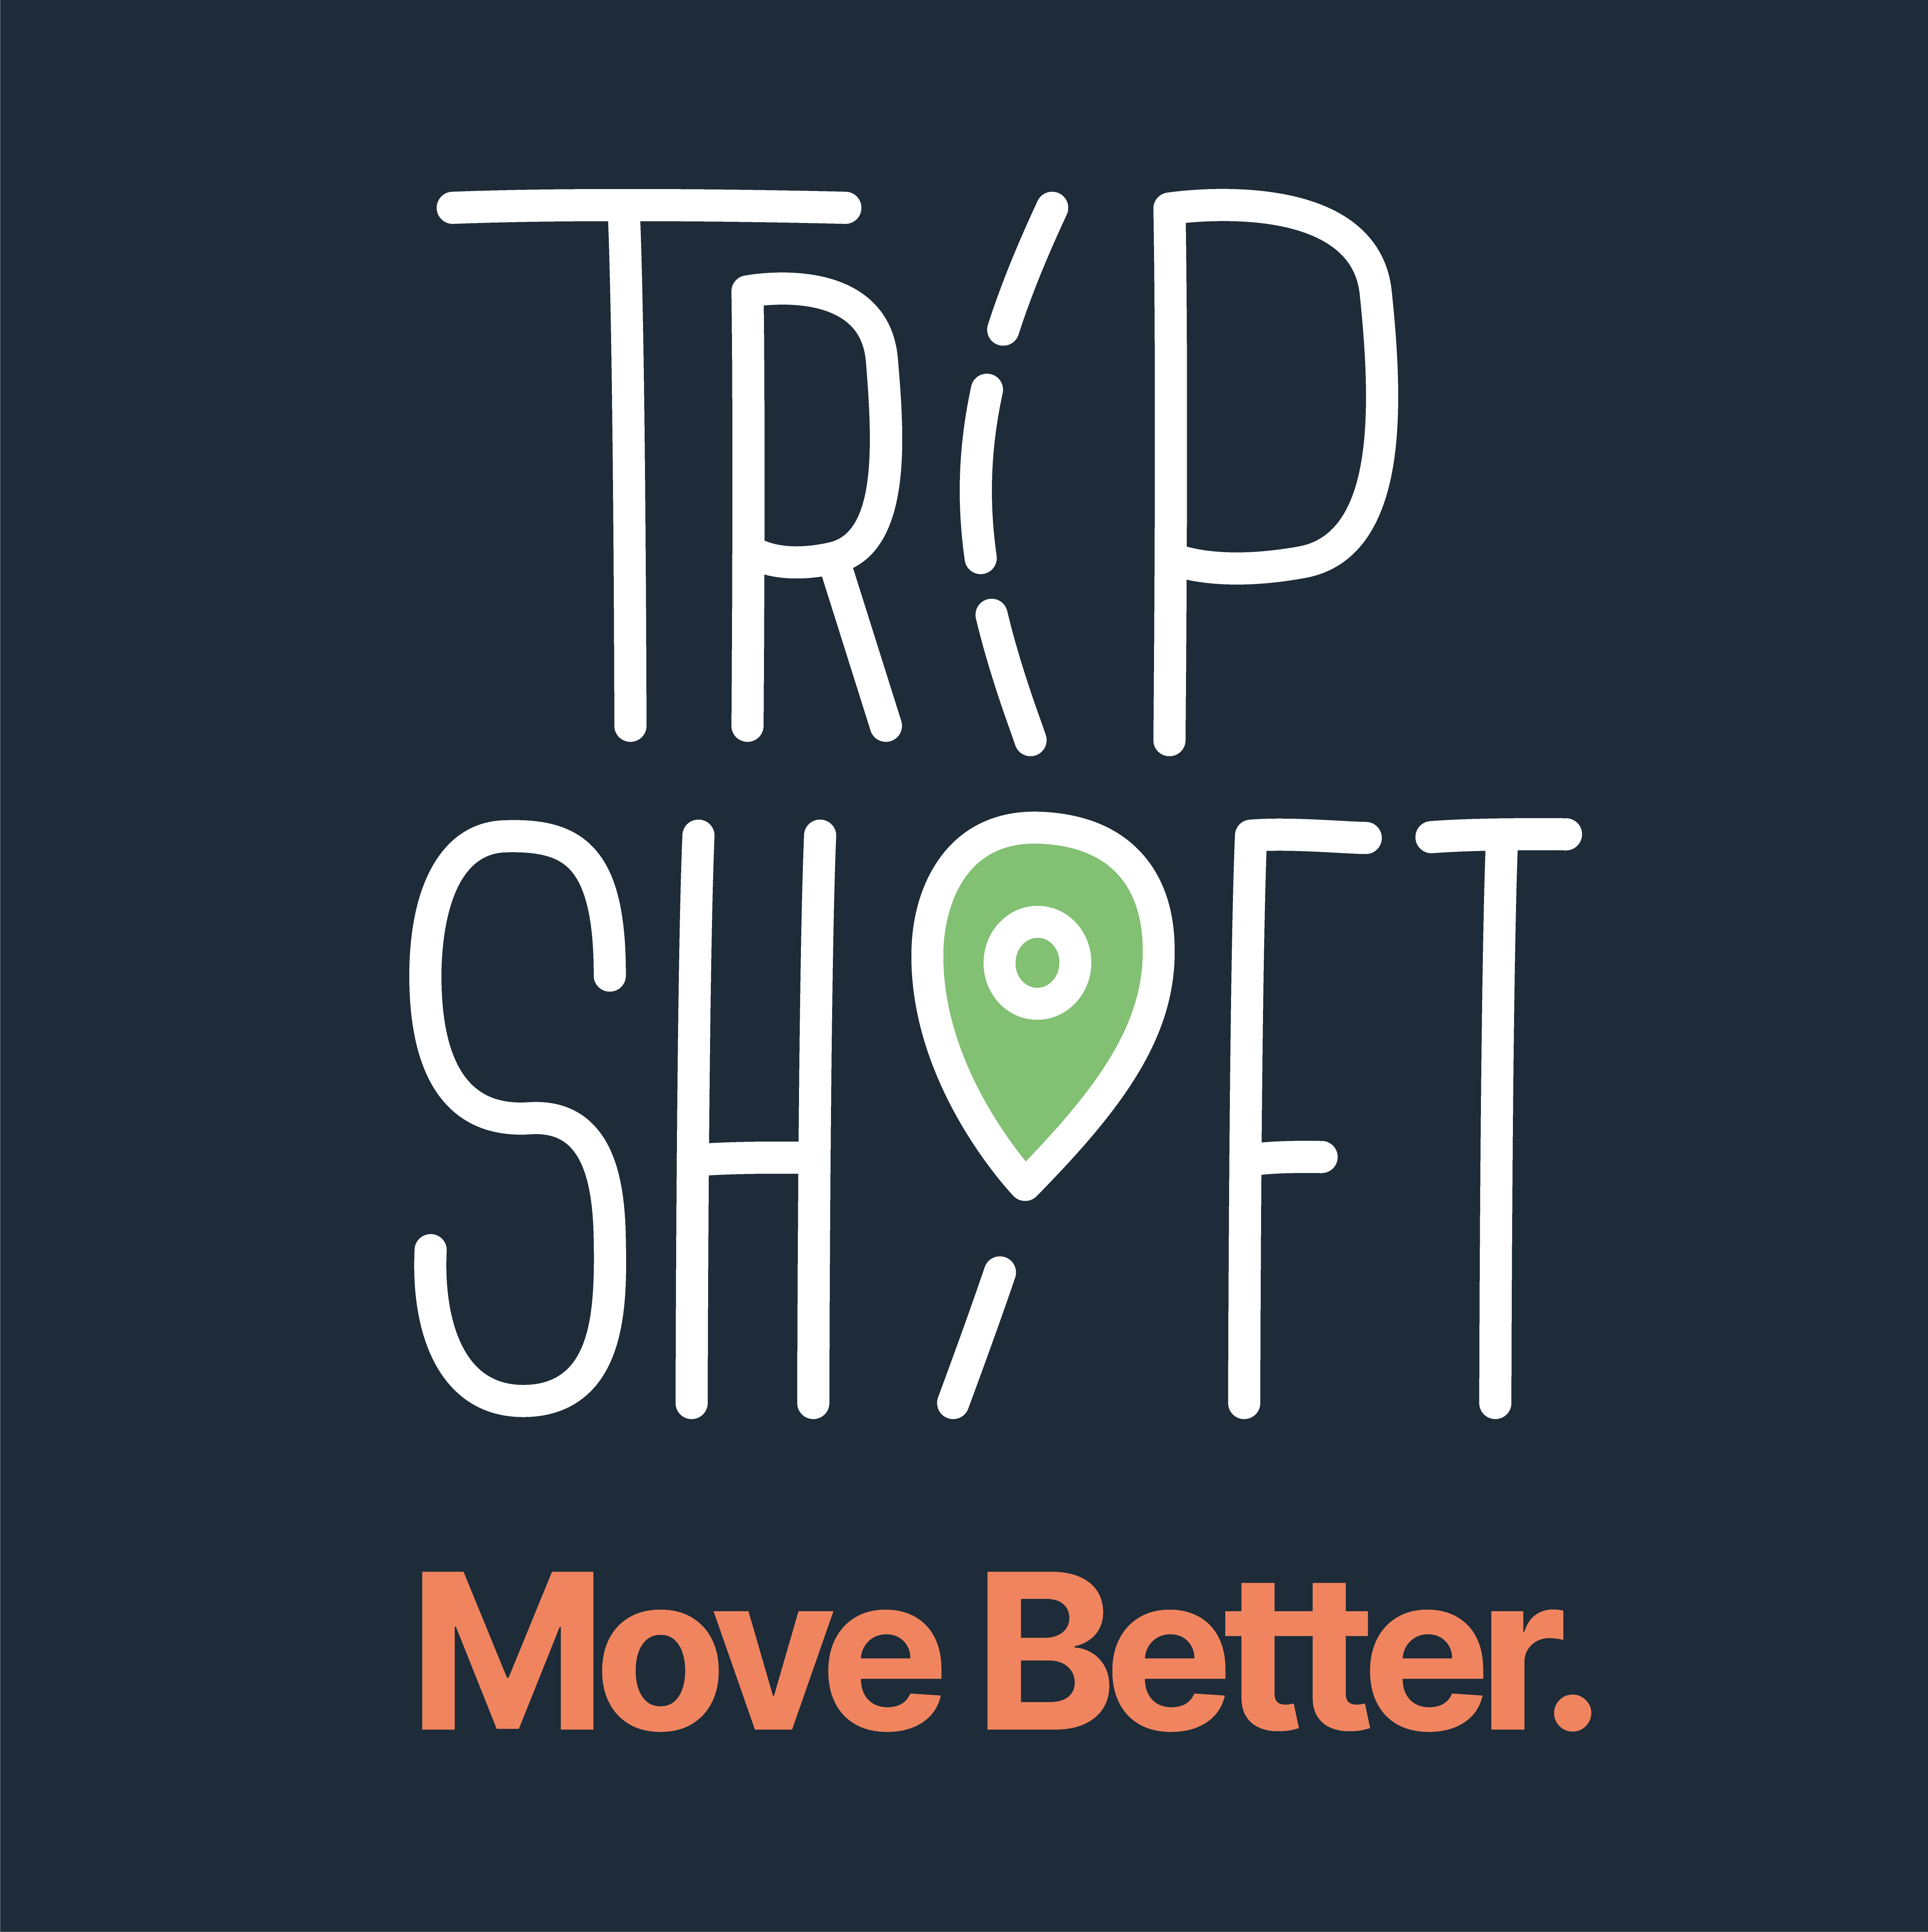 TripShift Limited